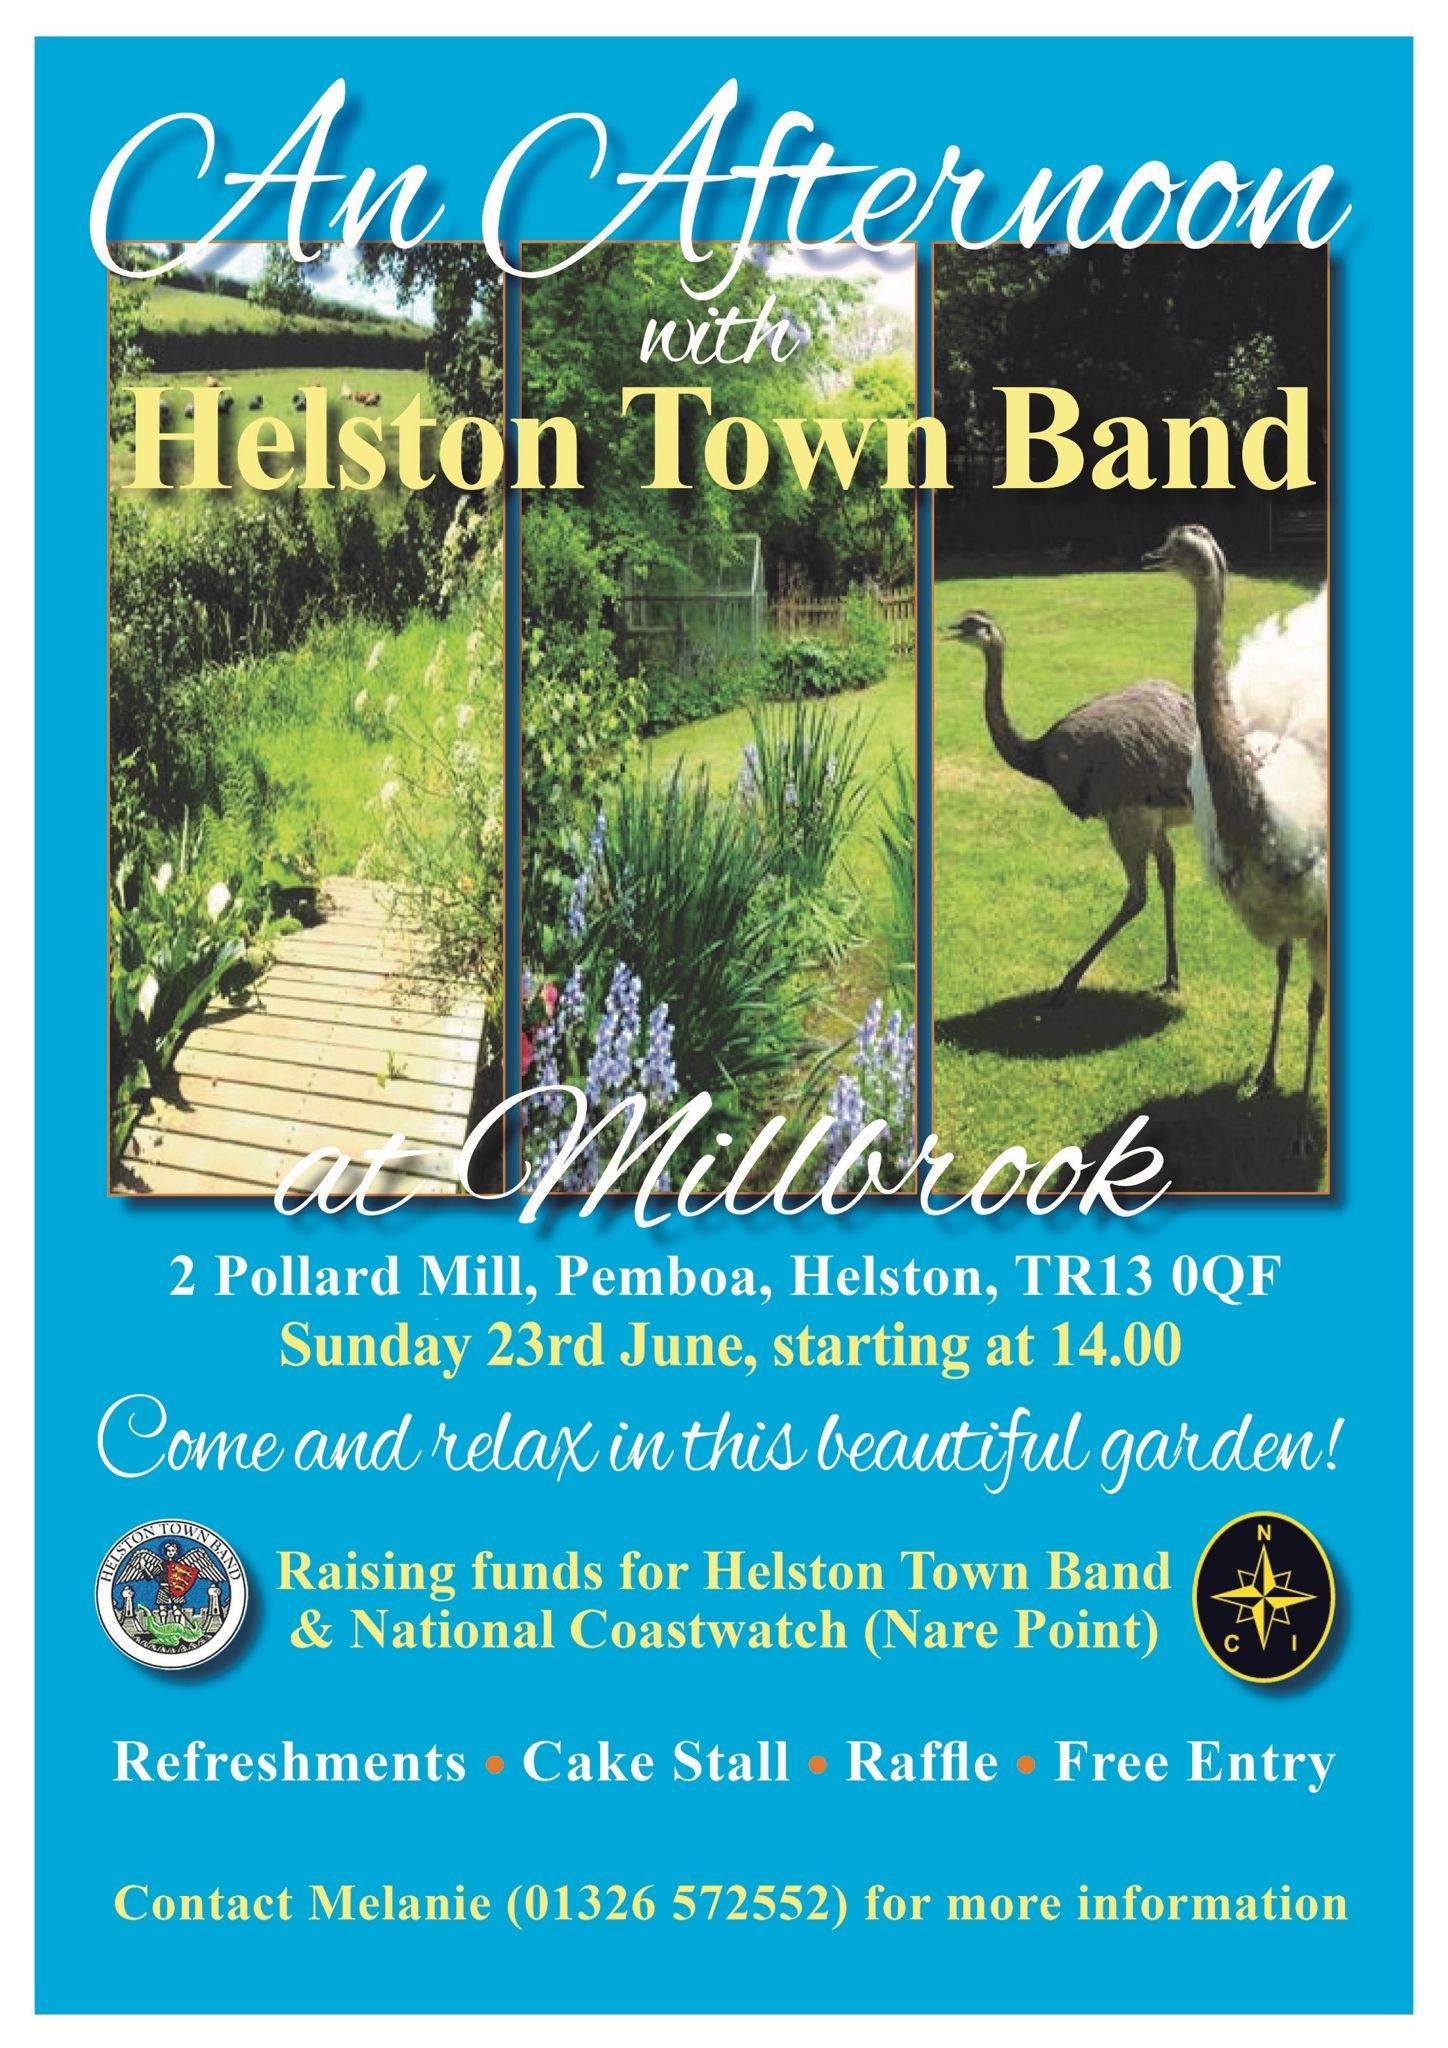 Concert at Millbrook in aid of National Coastwatch